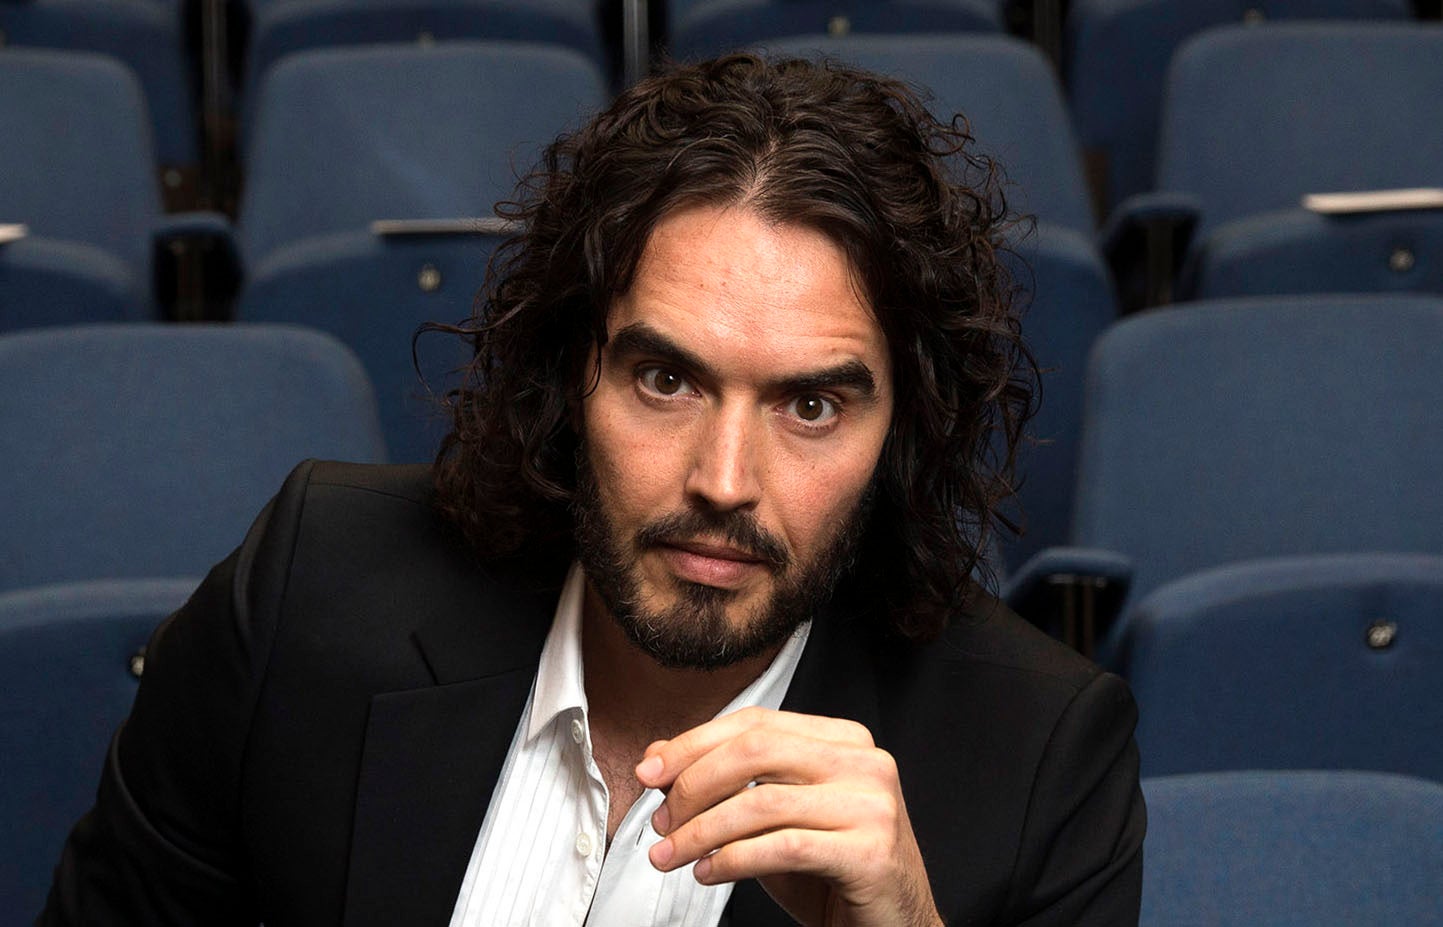 Russell Brand has hailed the #OccupyMurdoch movement